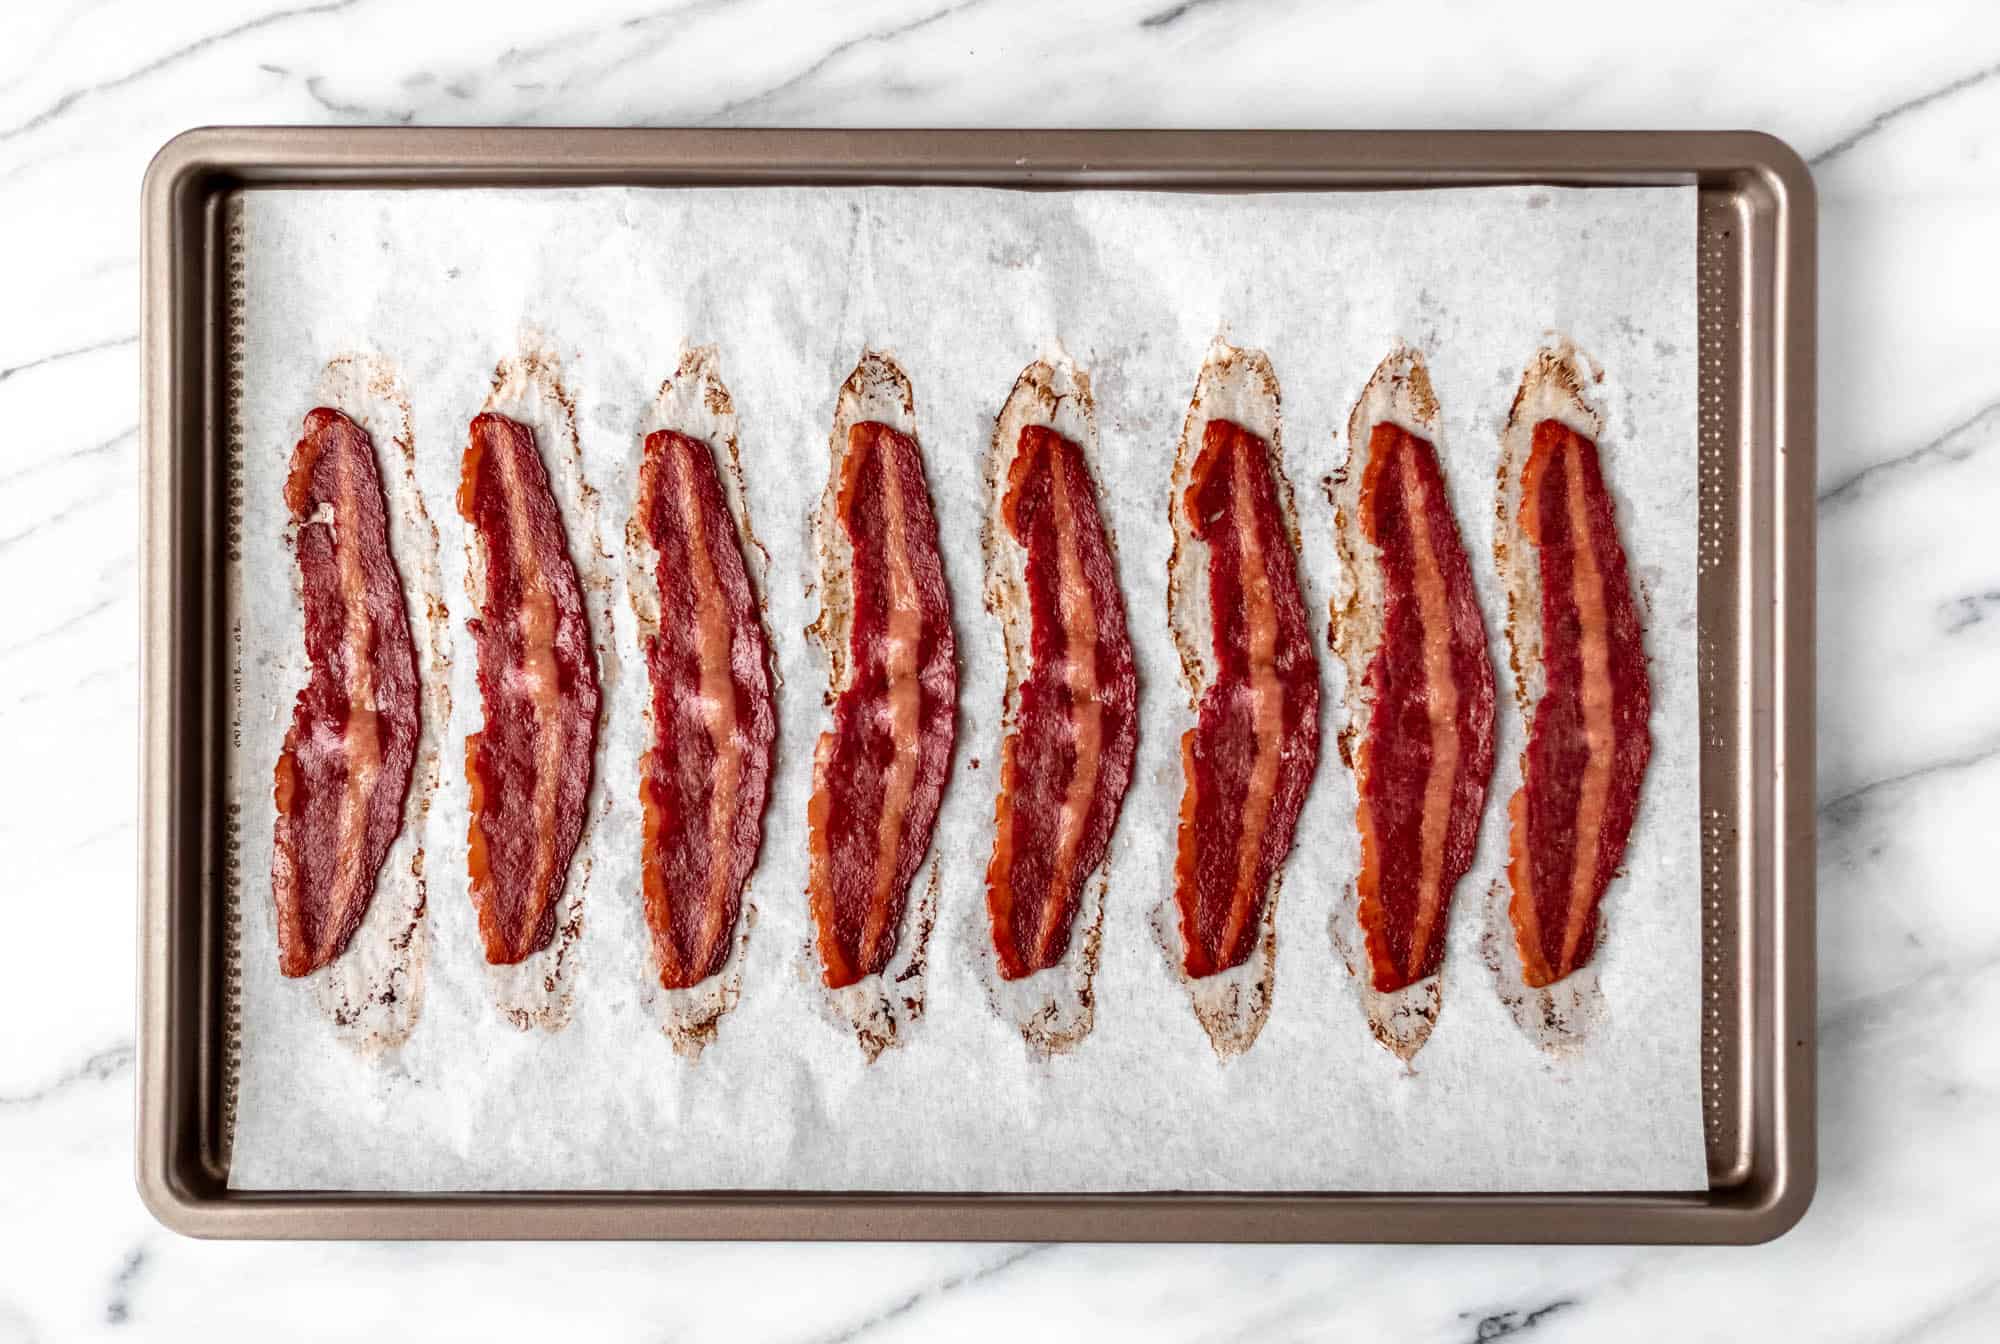 Cooked turkey bacon on a parchment paper lined baking sheet.